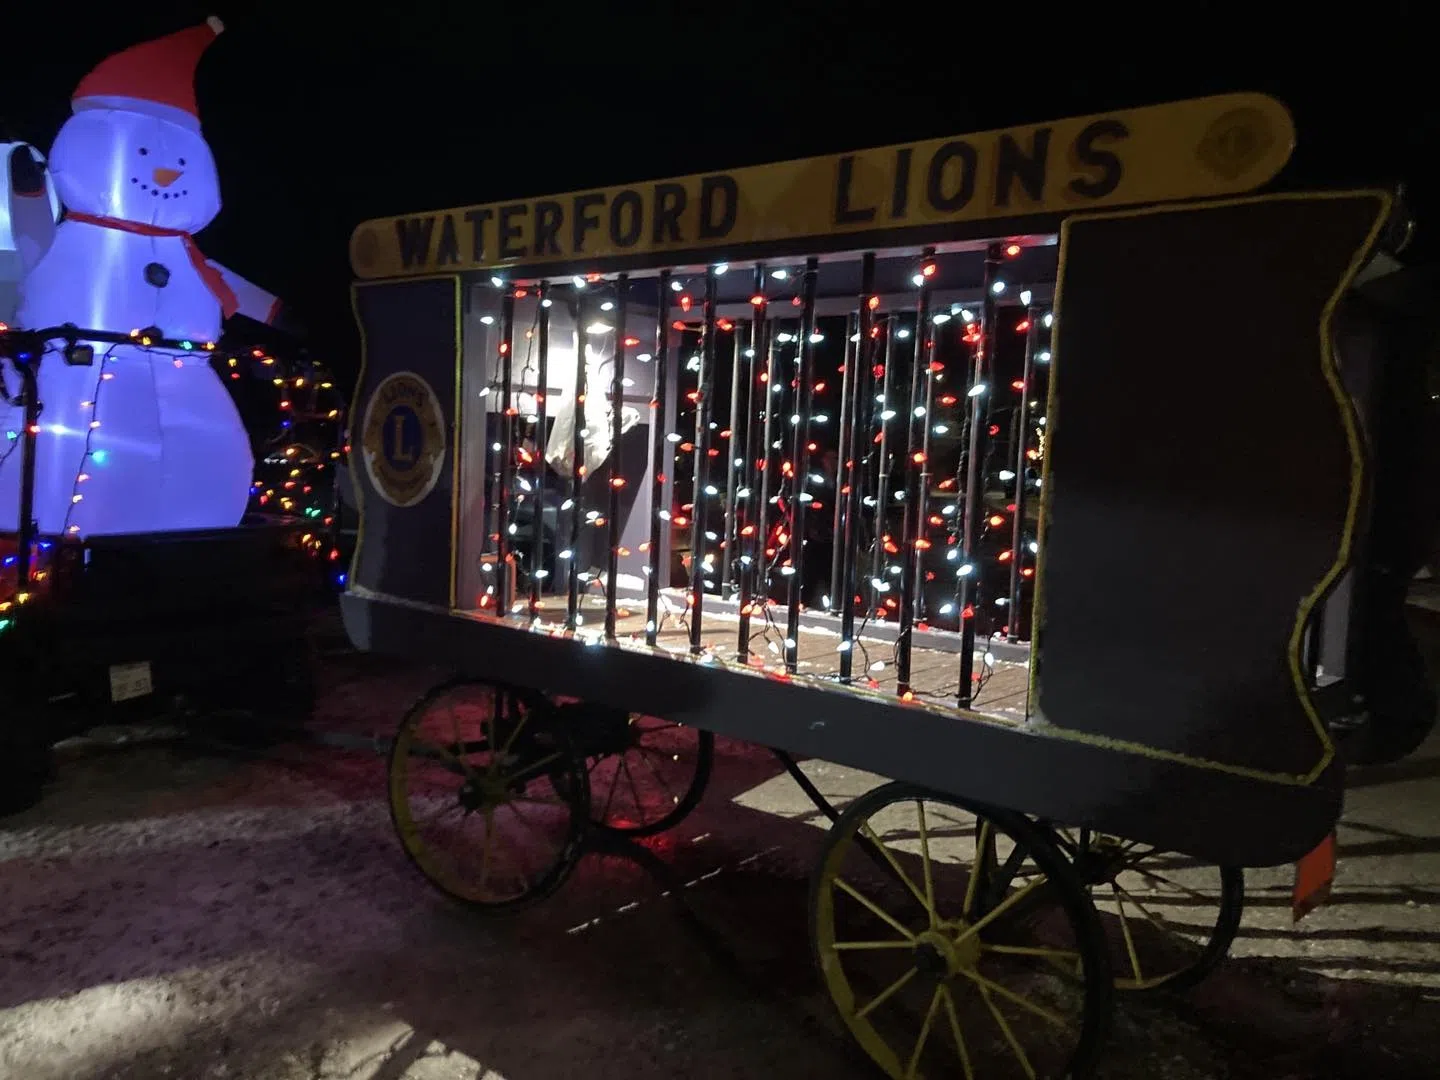 Nighttime Christmas parade comes to Waterford tomorrow NorfolkToday.ca